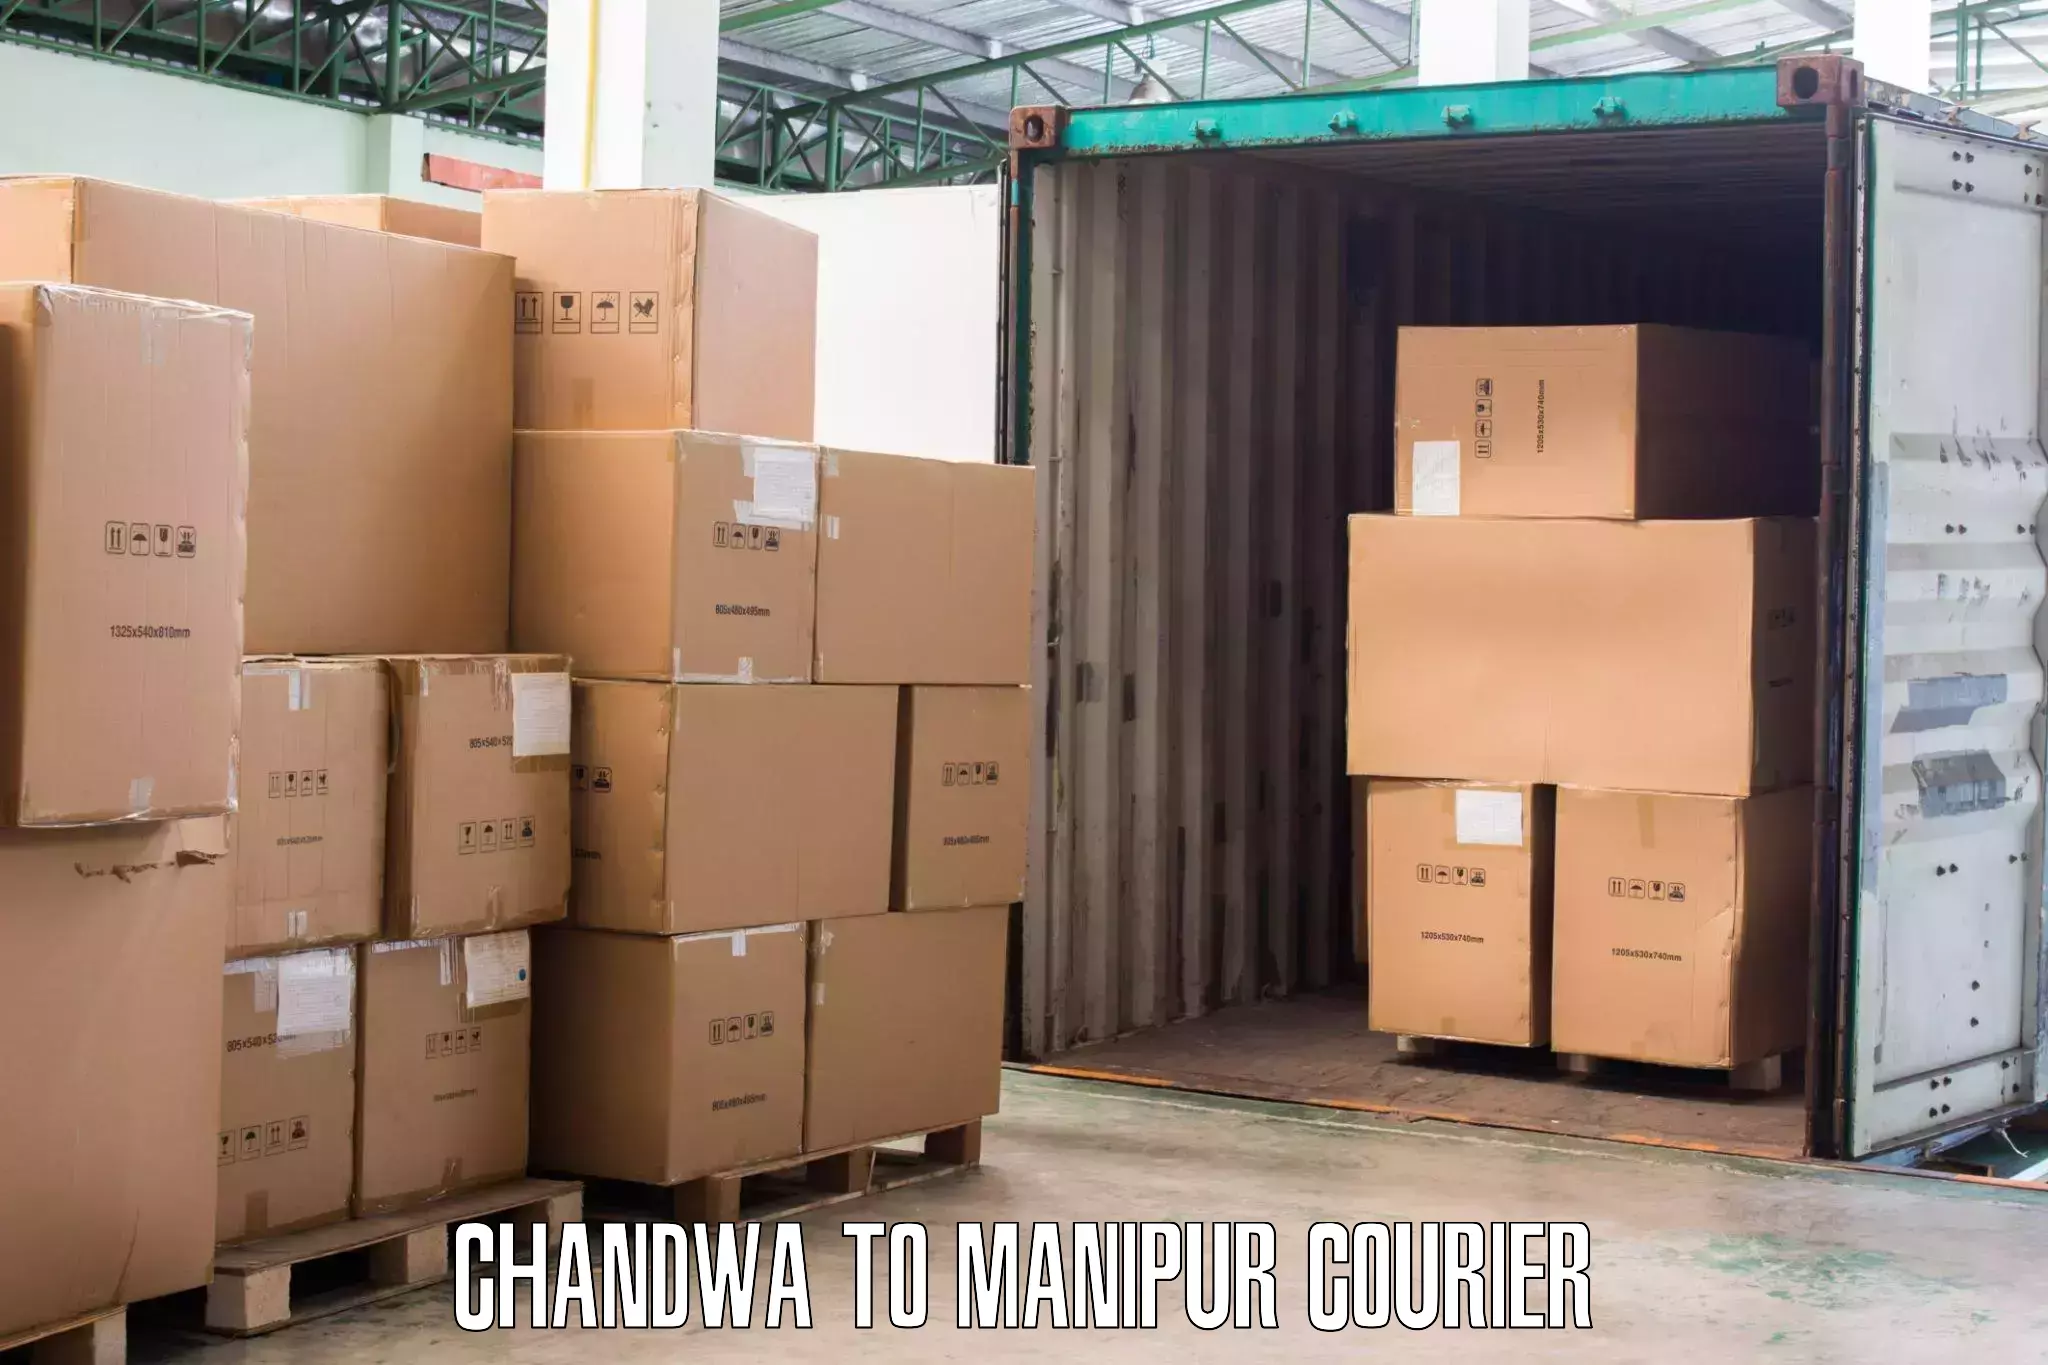 Local moving services Chandwa to Chandel